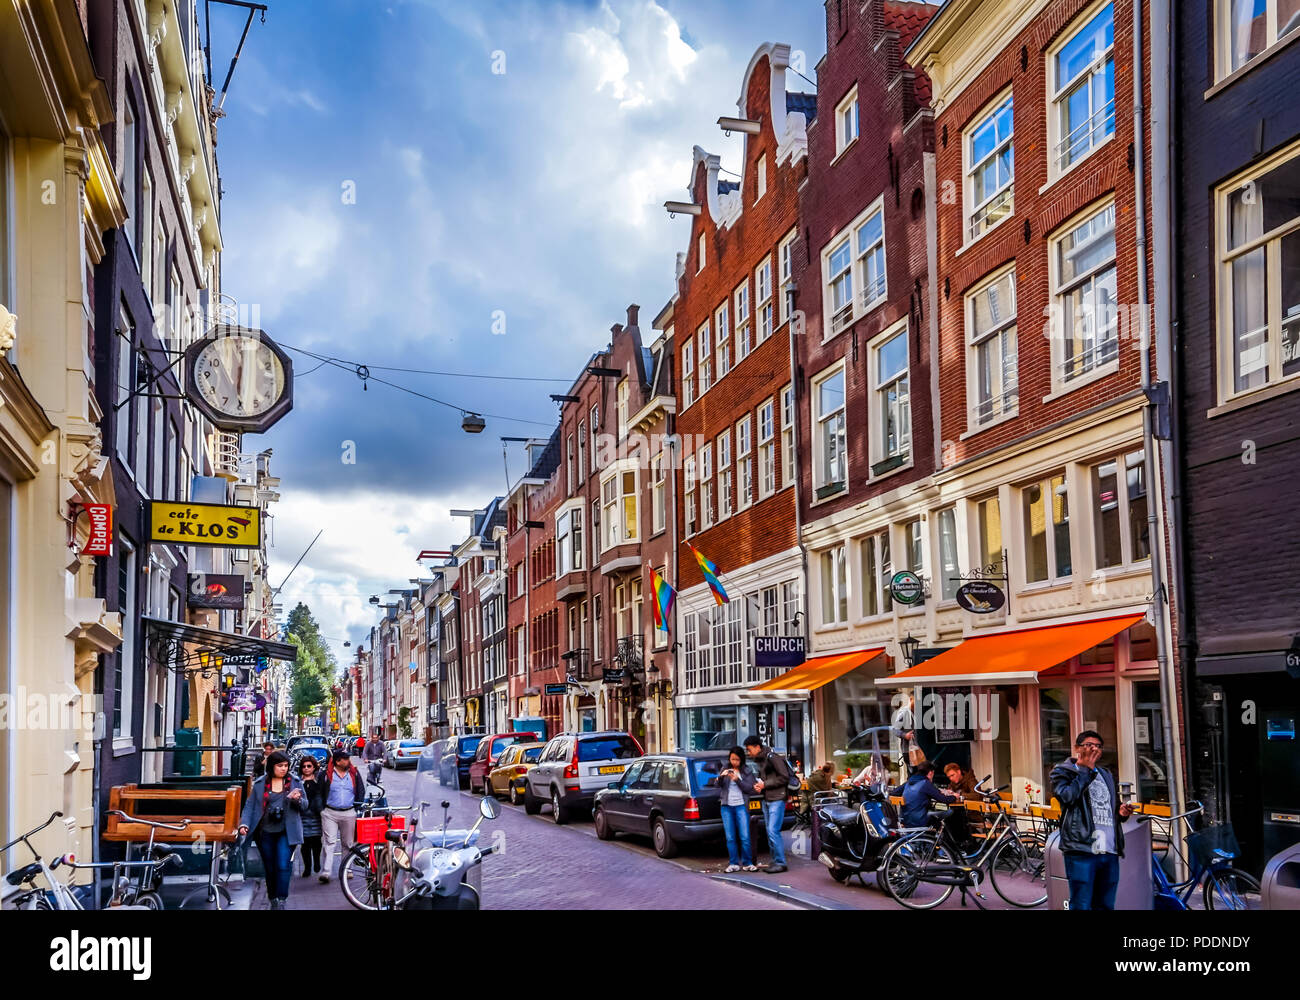 The Kerkstraat with its many historic typical Dutch buildings and stores in the center of the old city of Amsterdam in the Netherlands Stock Photo